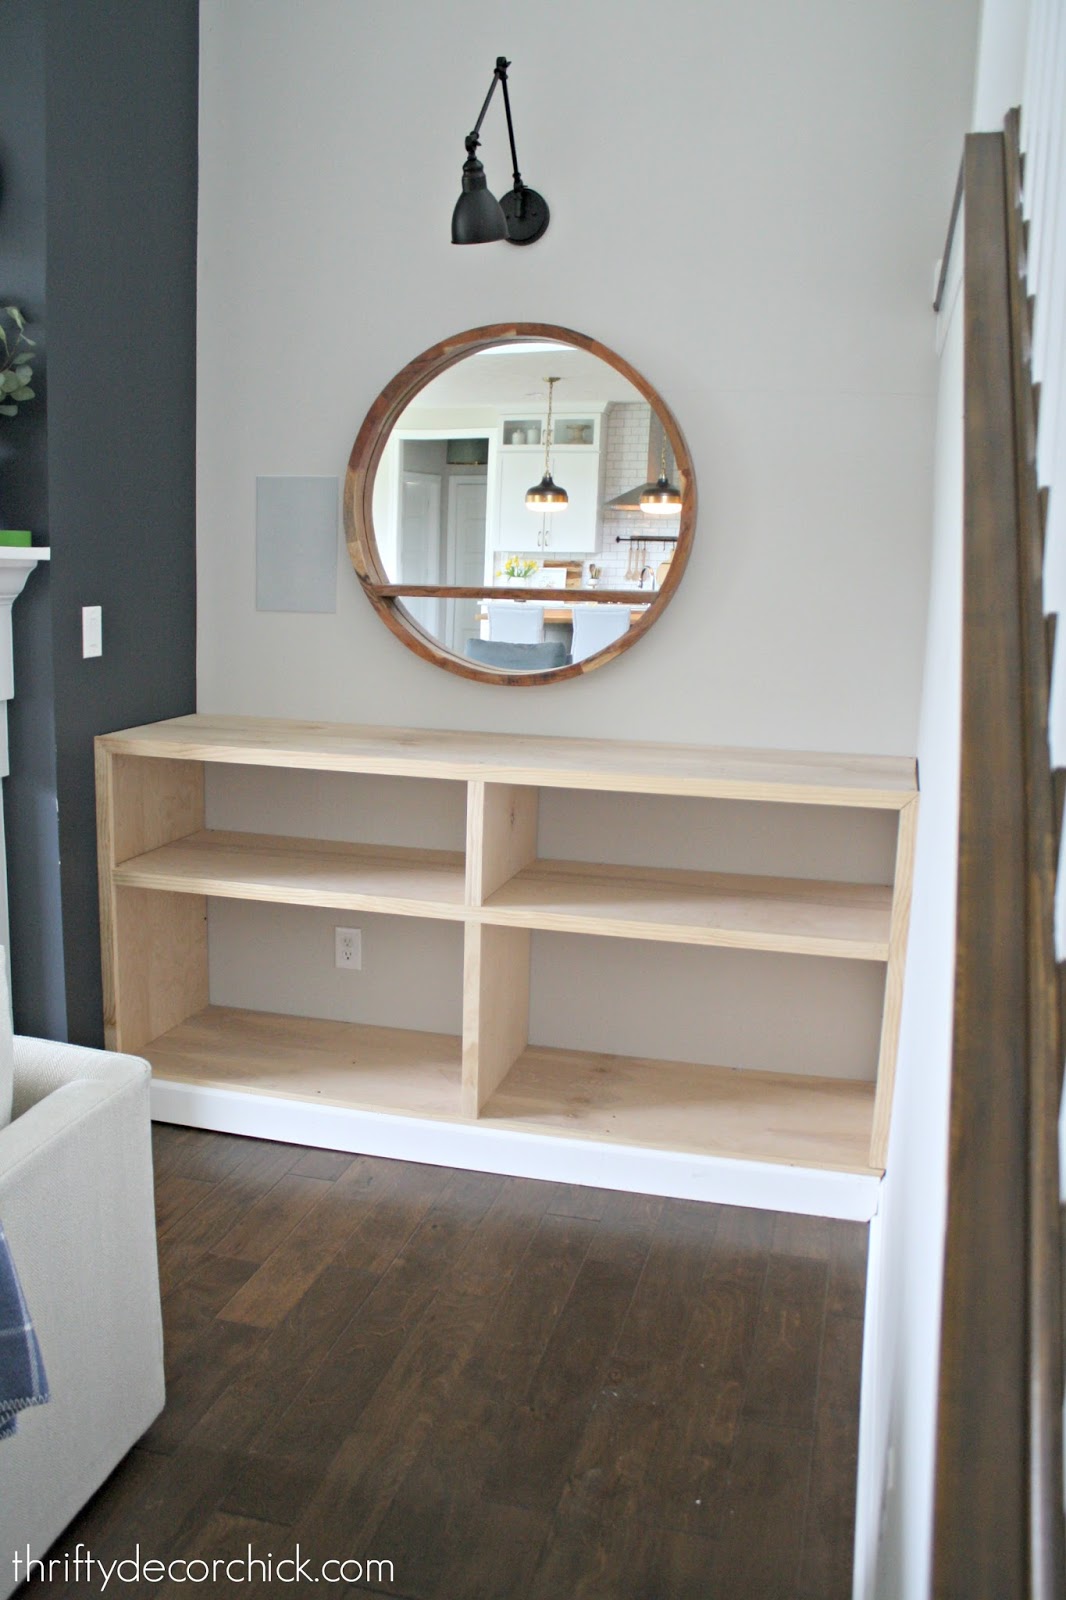 Diy Bookcases By The Fireplace, Diy Fireplace Shelves